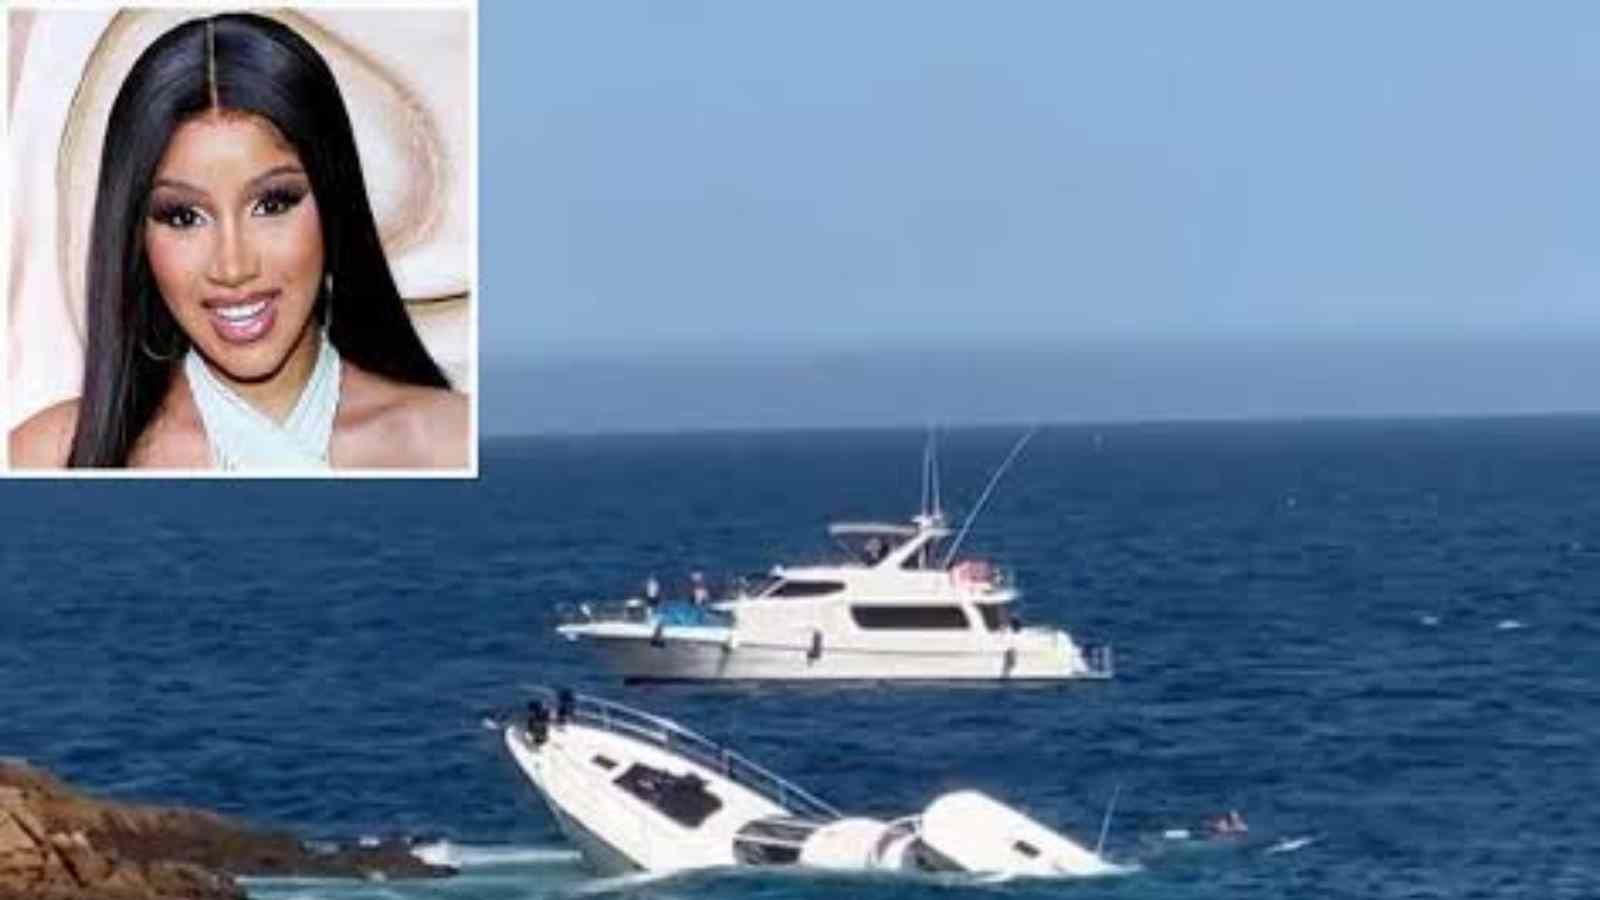 Cardi B and Offset Watch Yacht Sink While on Exotic Vacation